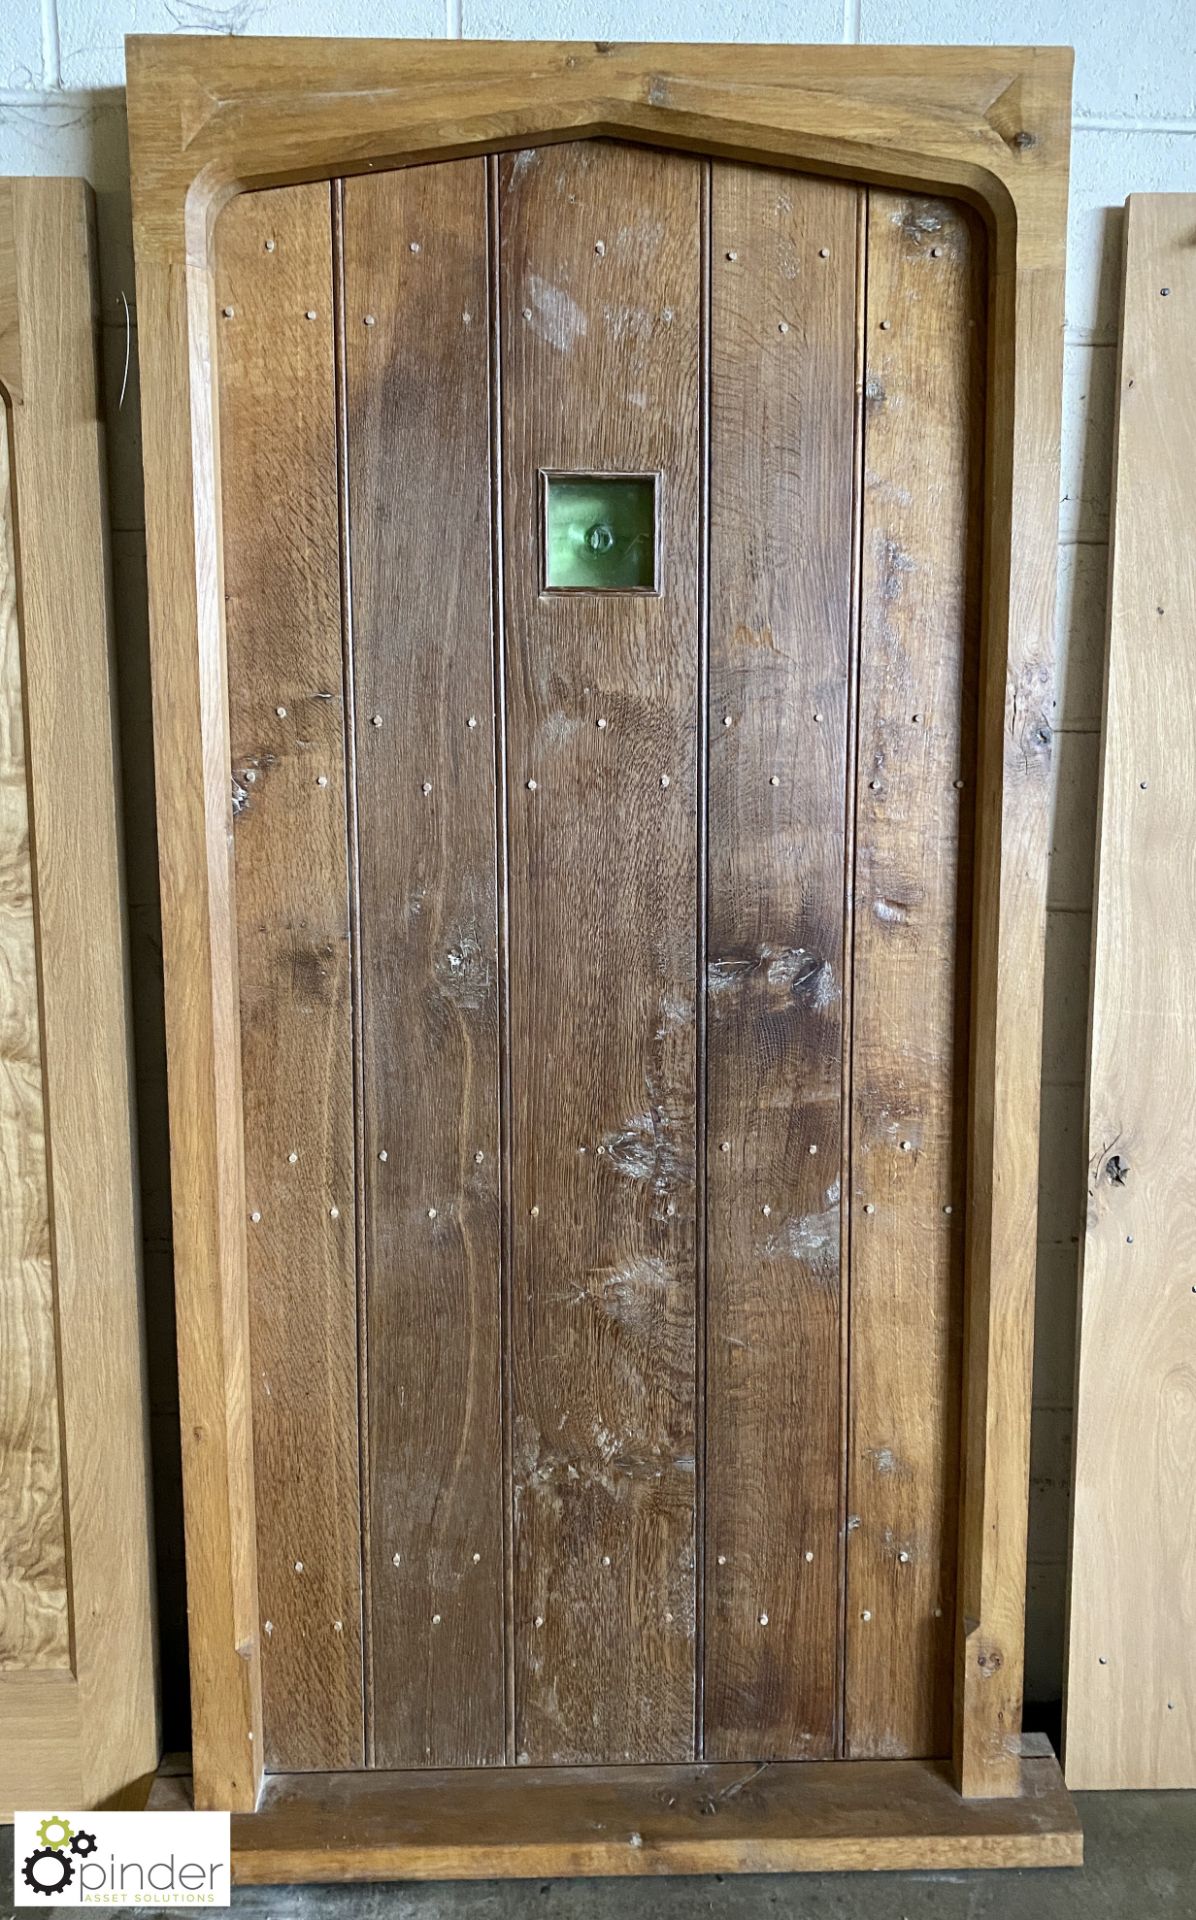 Solid oak External Door with bull eye glass and frame, 1023mm wide x 2045mm high including frame